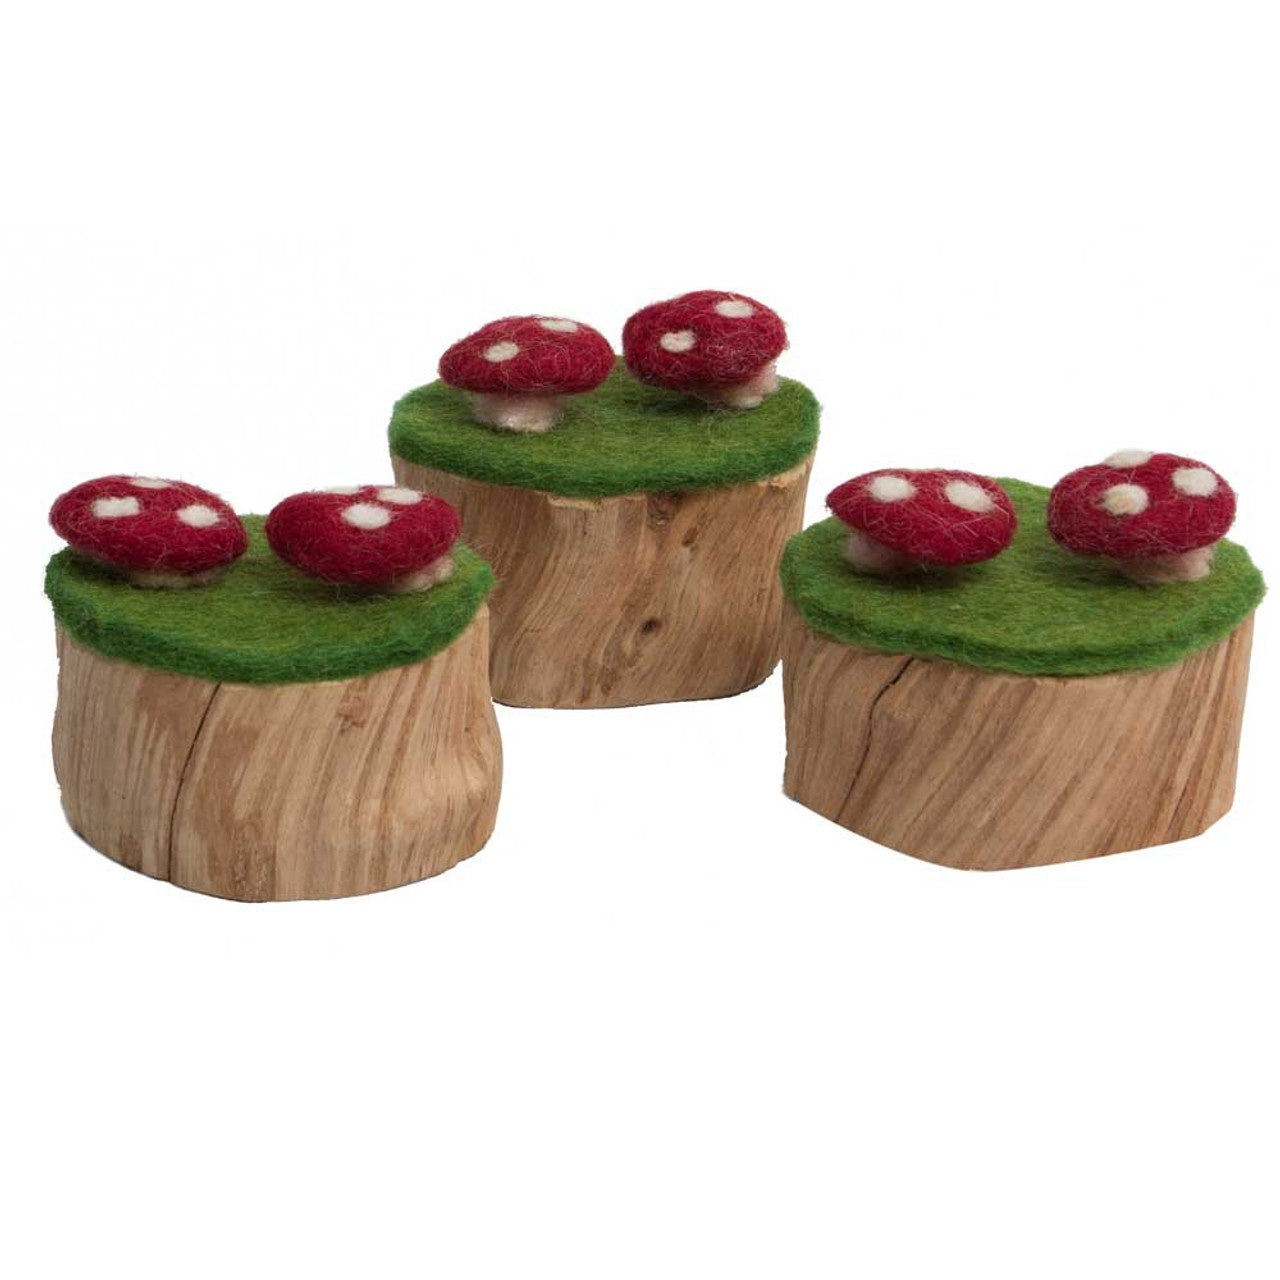 PAPOOSE Toadstools on Trunk - Set of 3